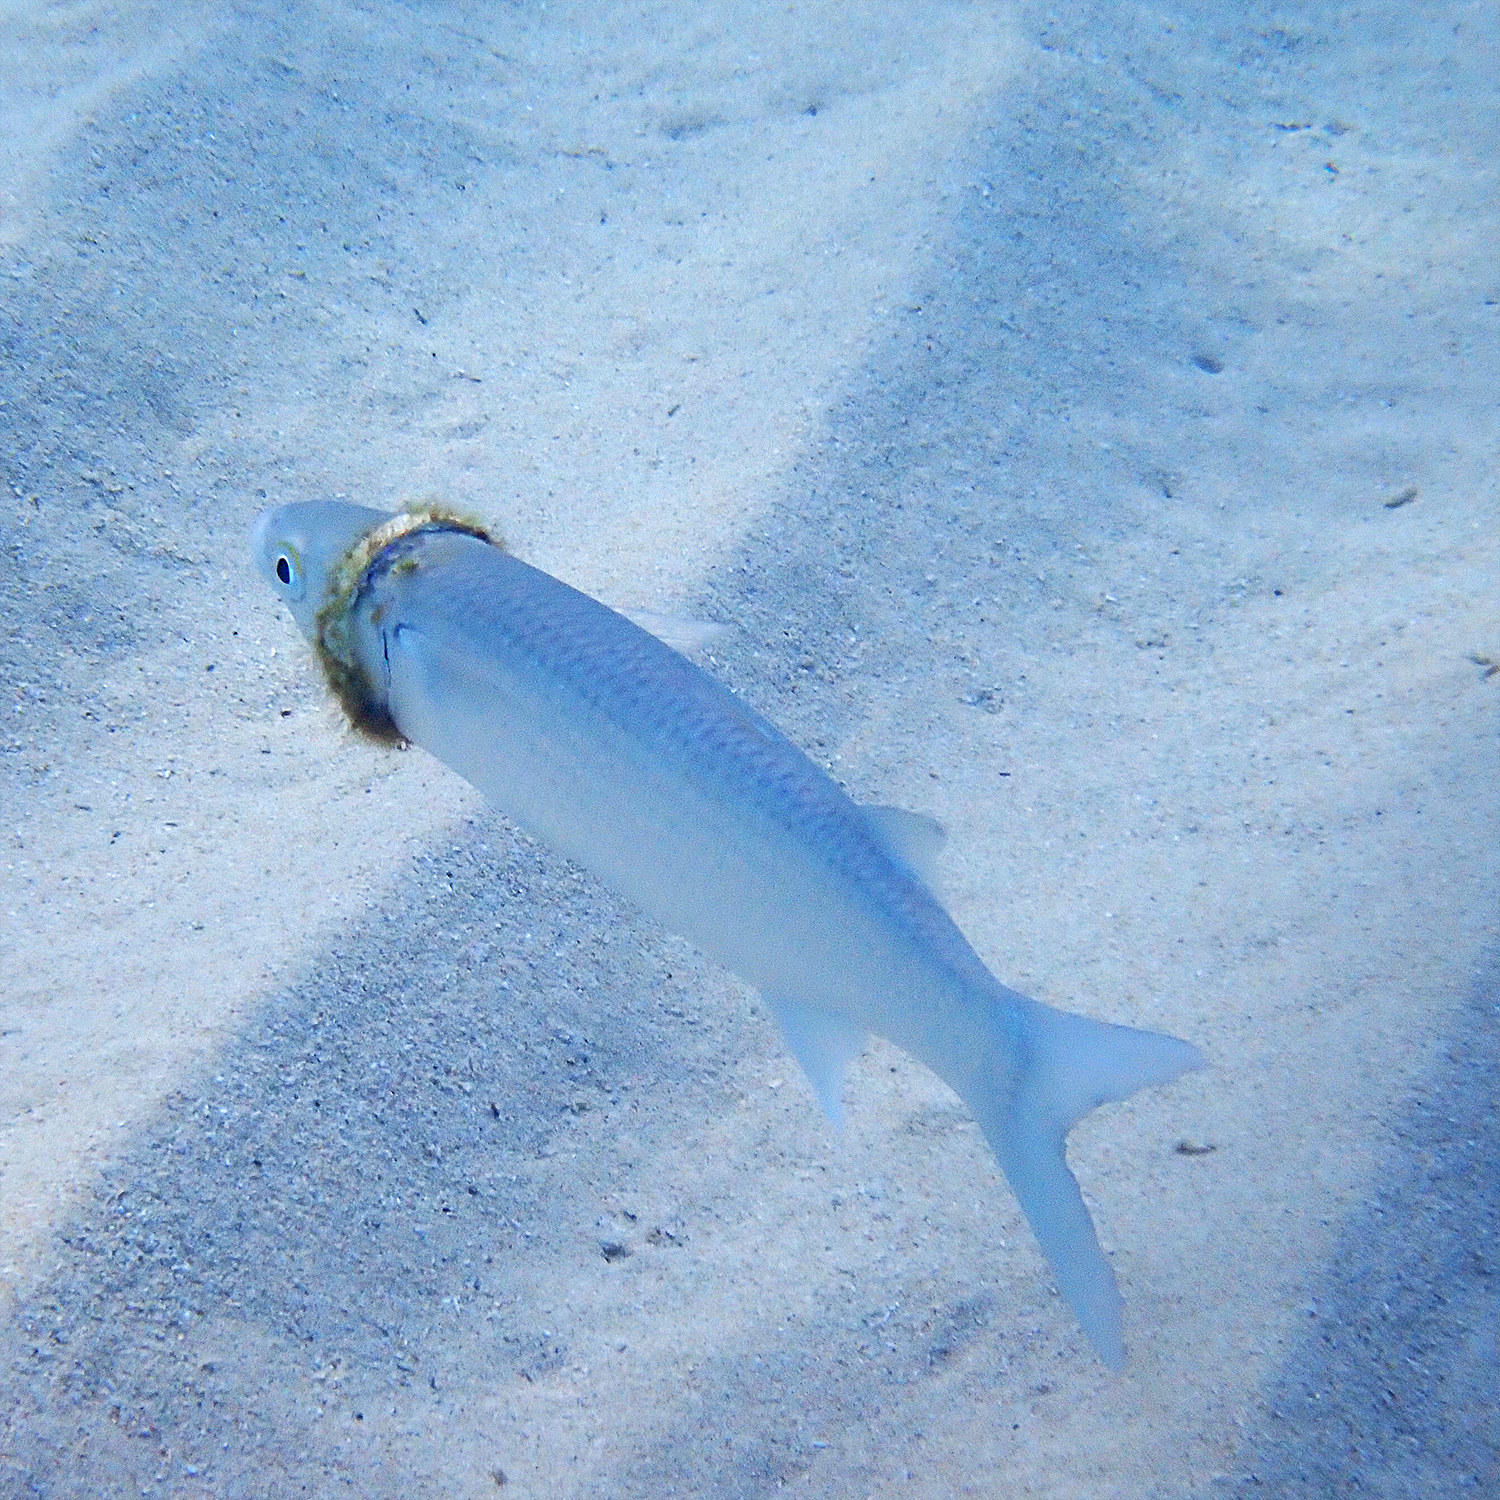 A small fish with a plastic ring wrapped around its body